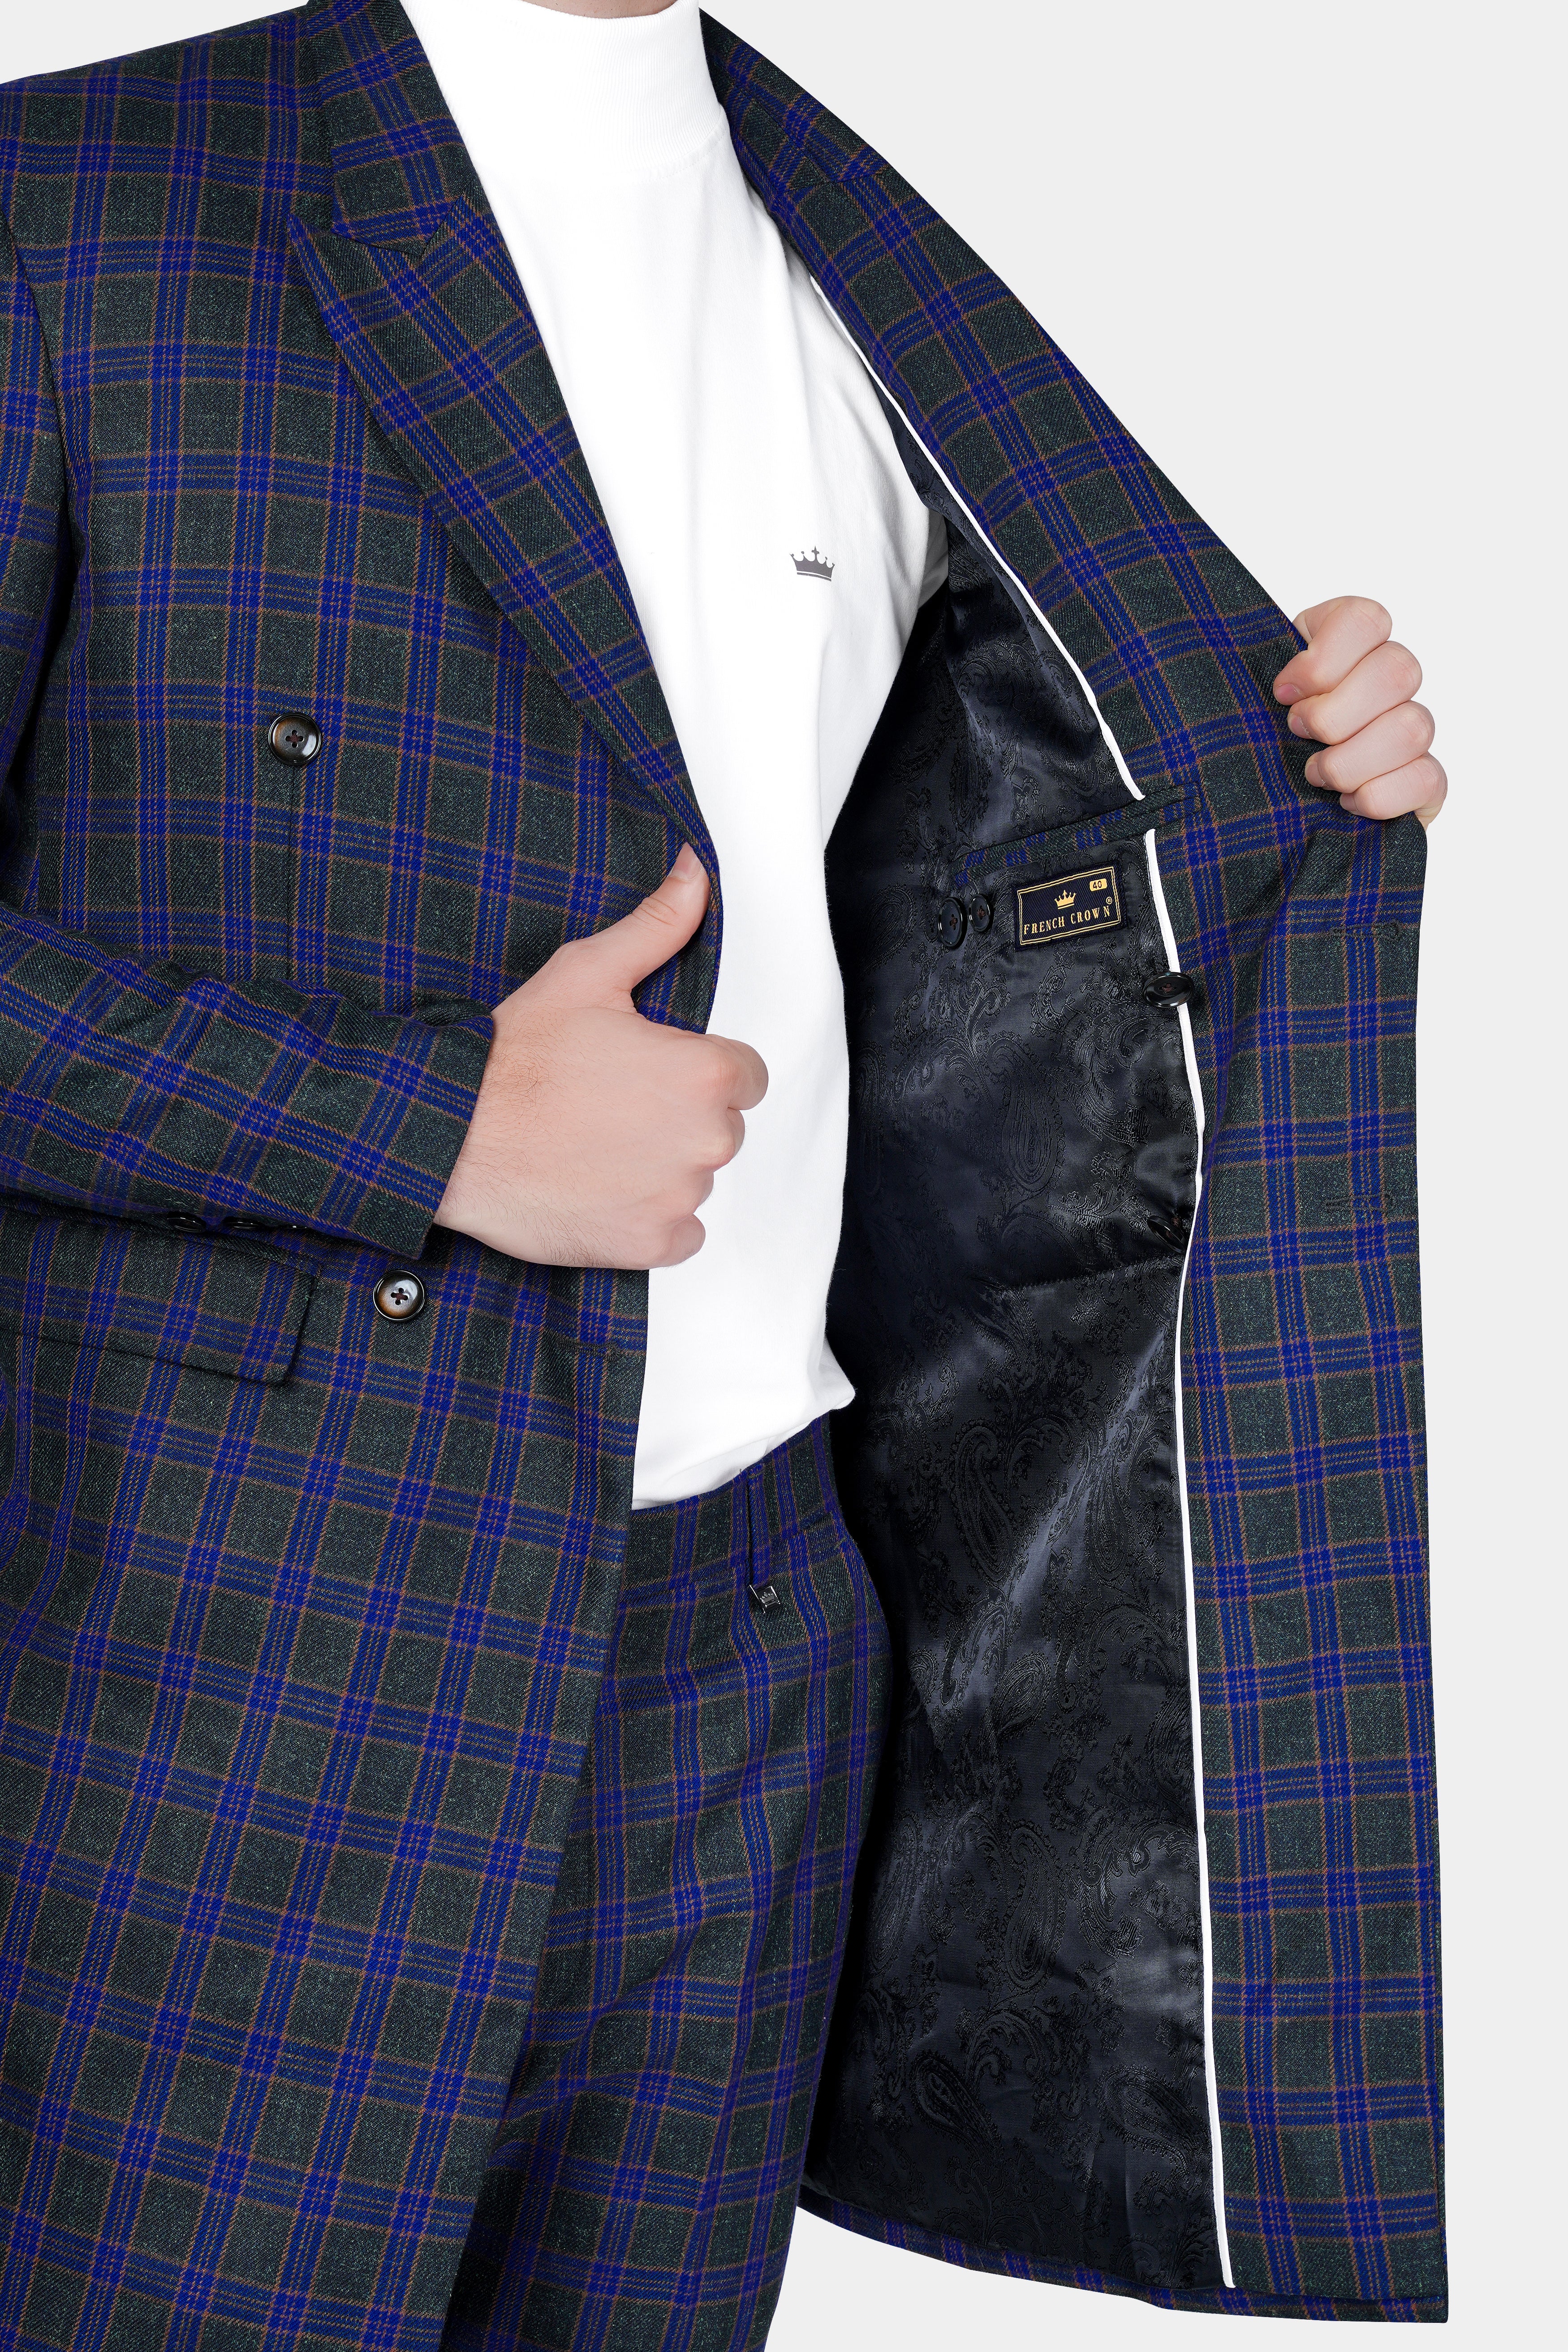 Zodiac Blue and Piano Black Plaid Tweed Double Breasted Trench Coat With Pant